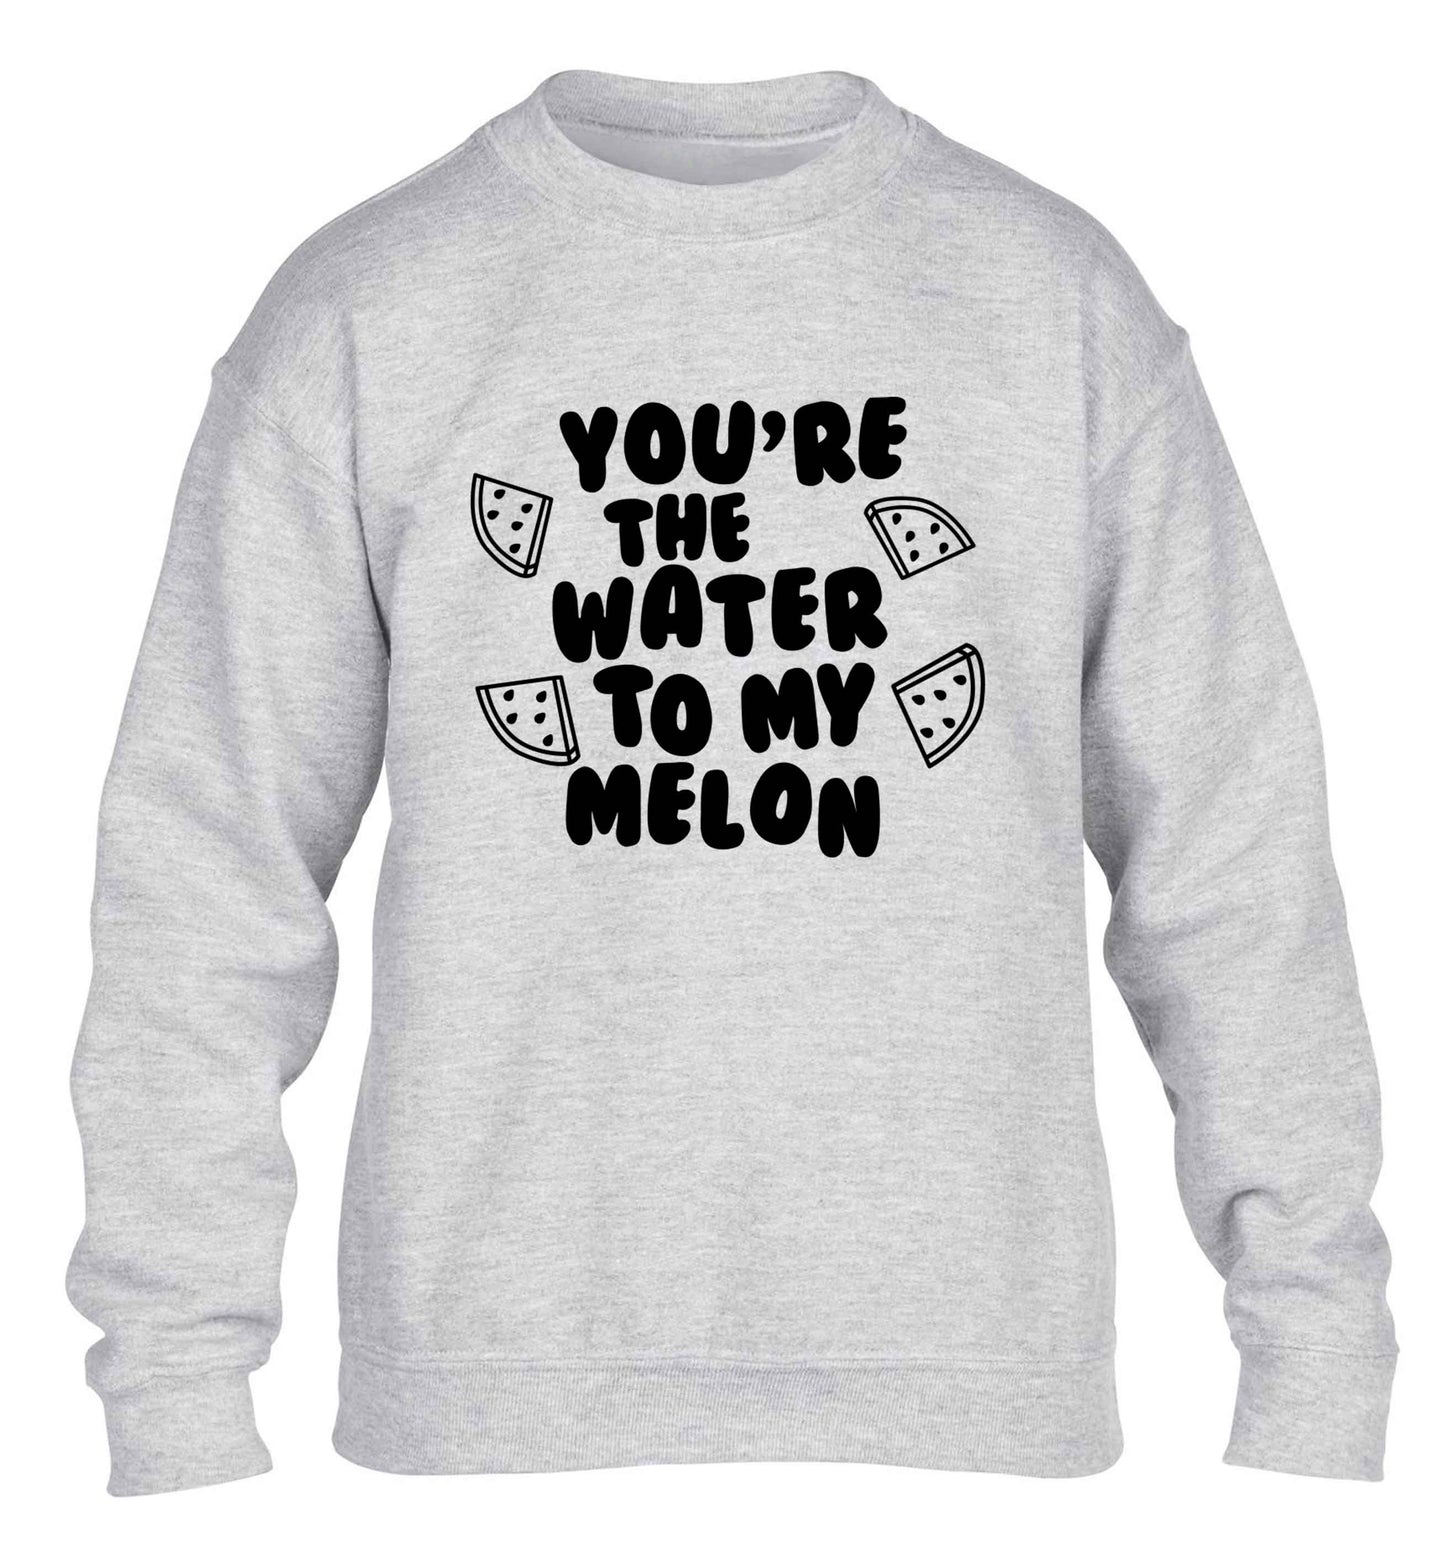 You're the water to my melon children's grey sweater 12-13 Years